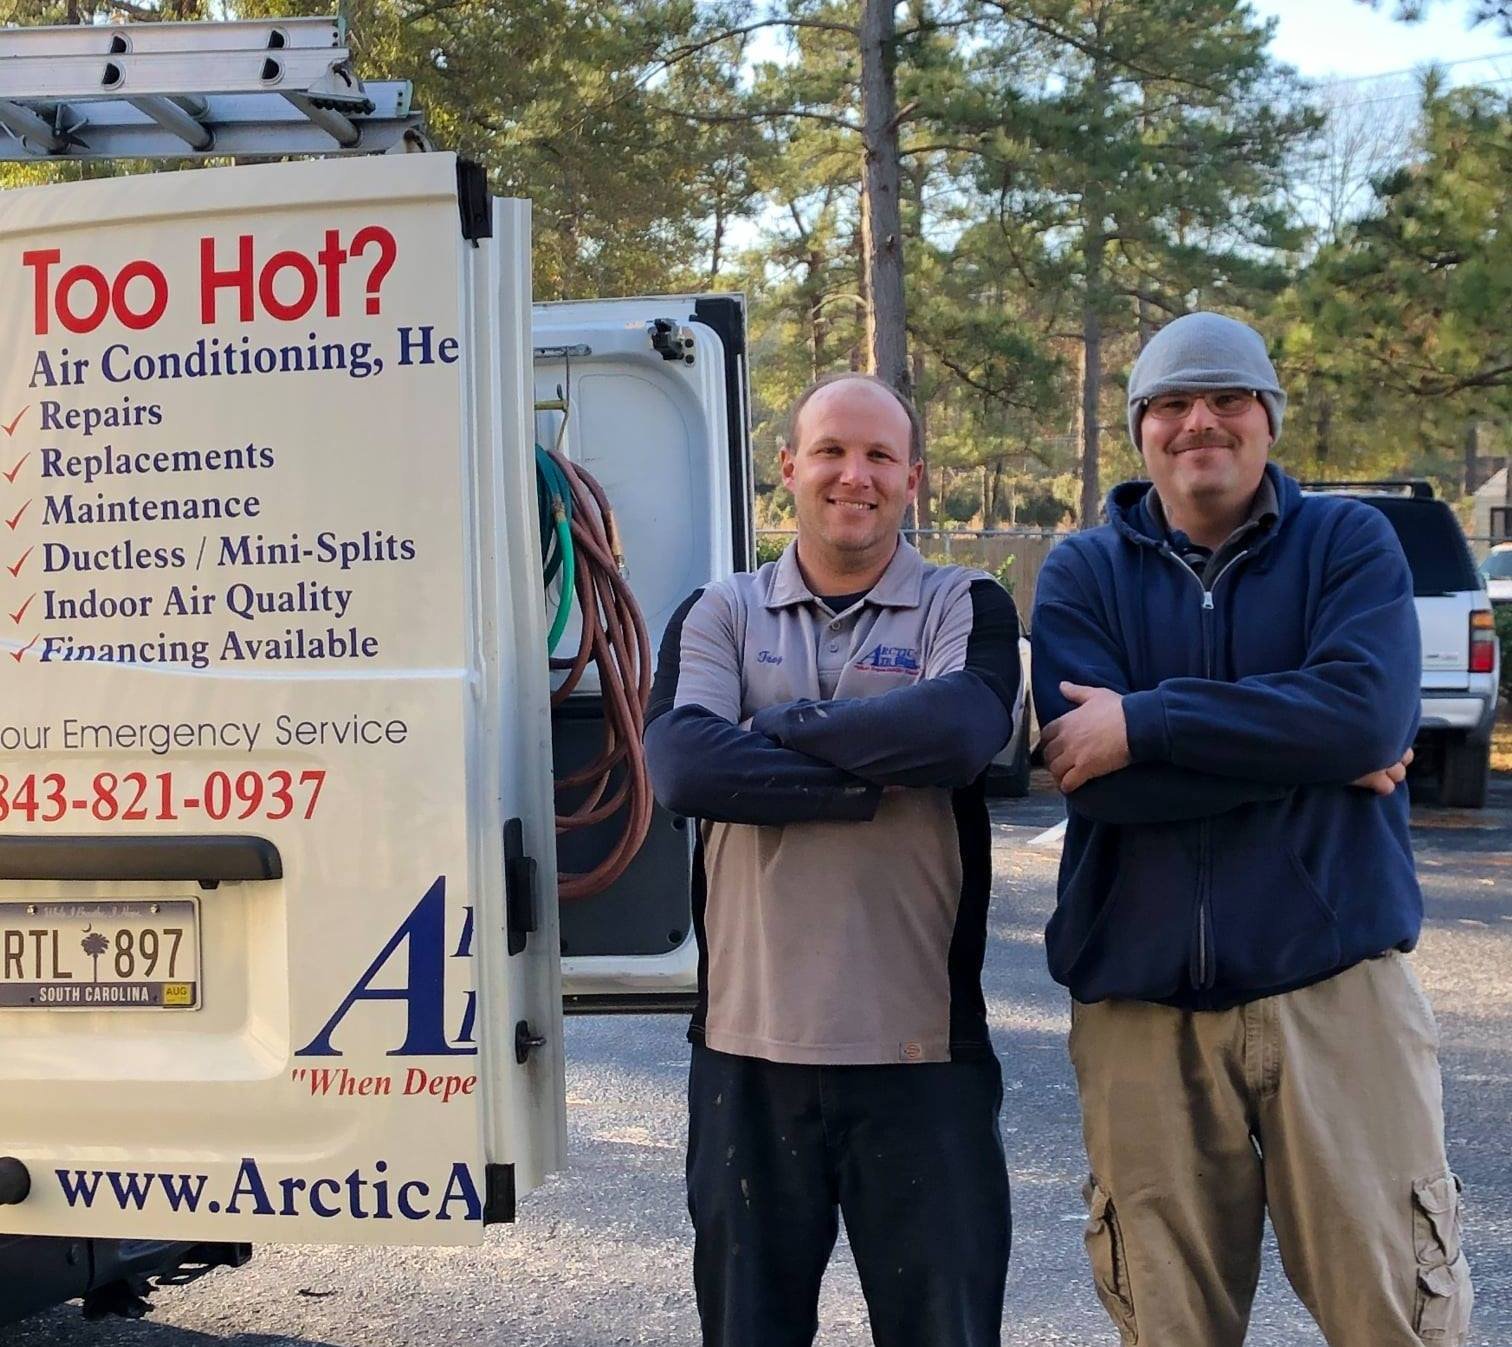 Arctic Air, Inc. – Air Conditioning, Heating, Duct, Commercial Refrigeration